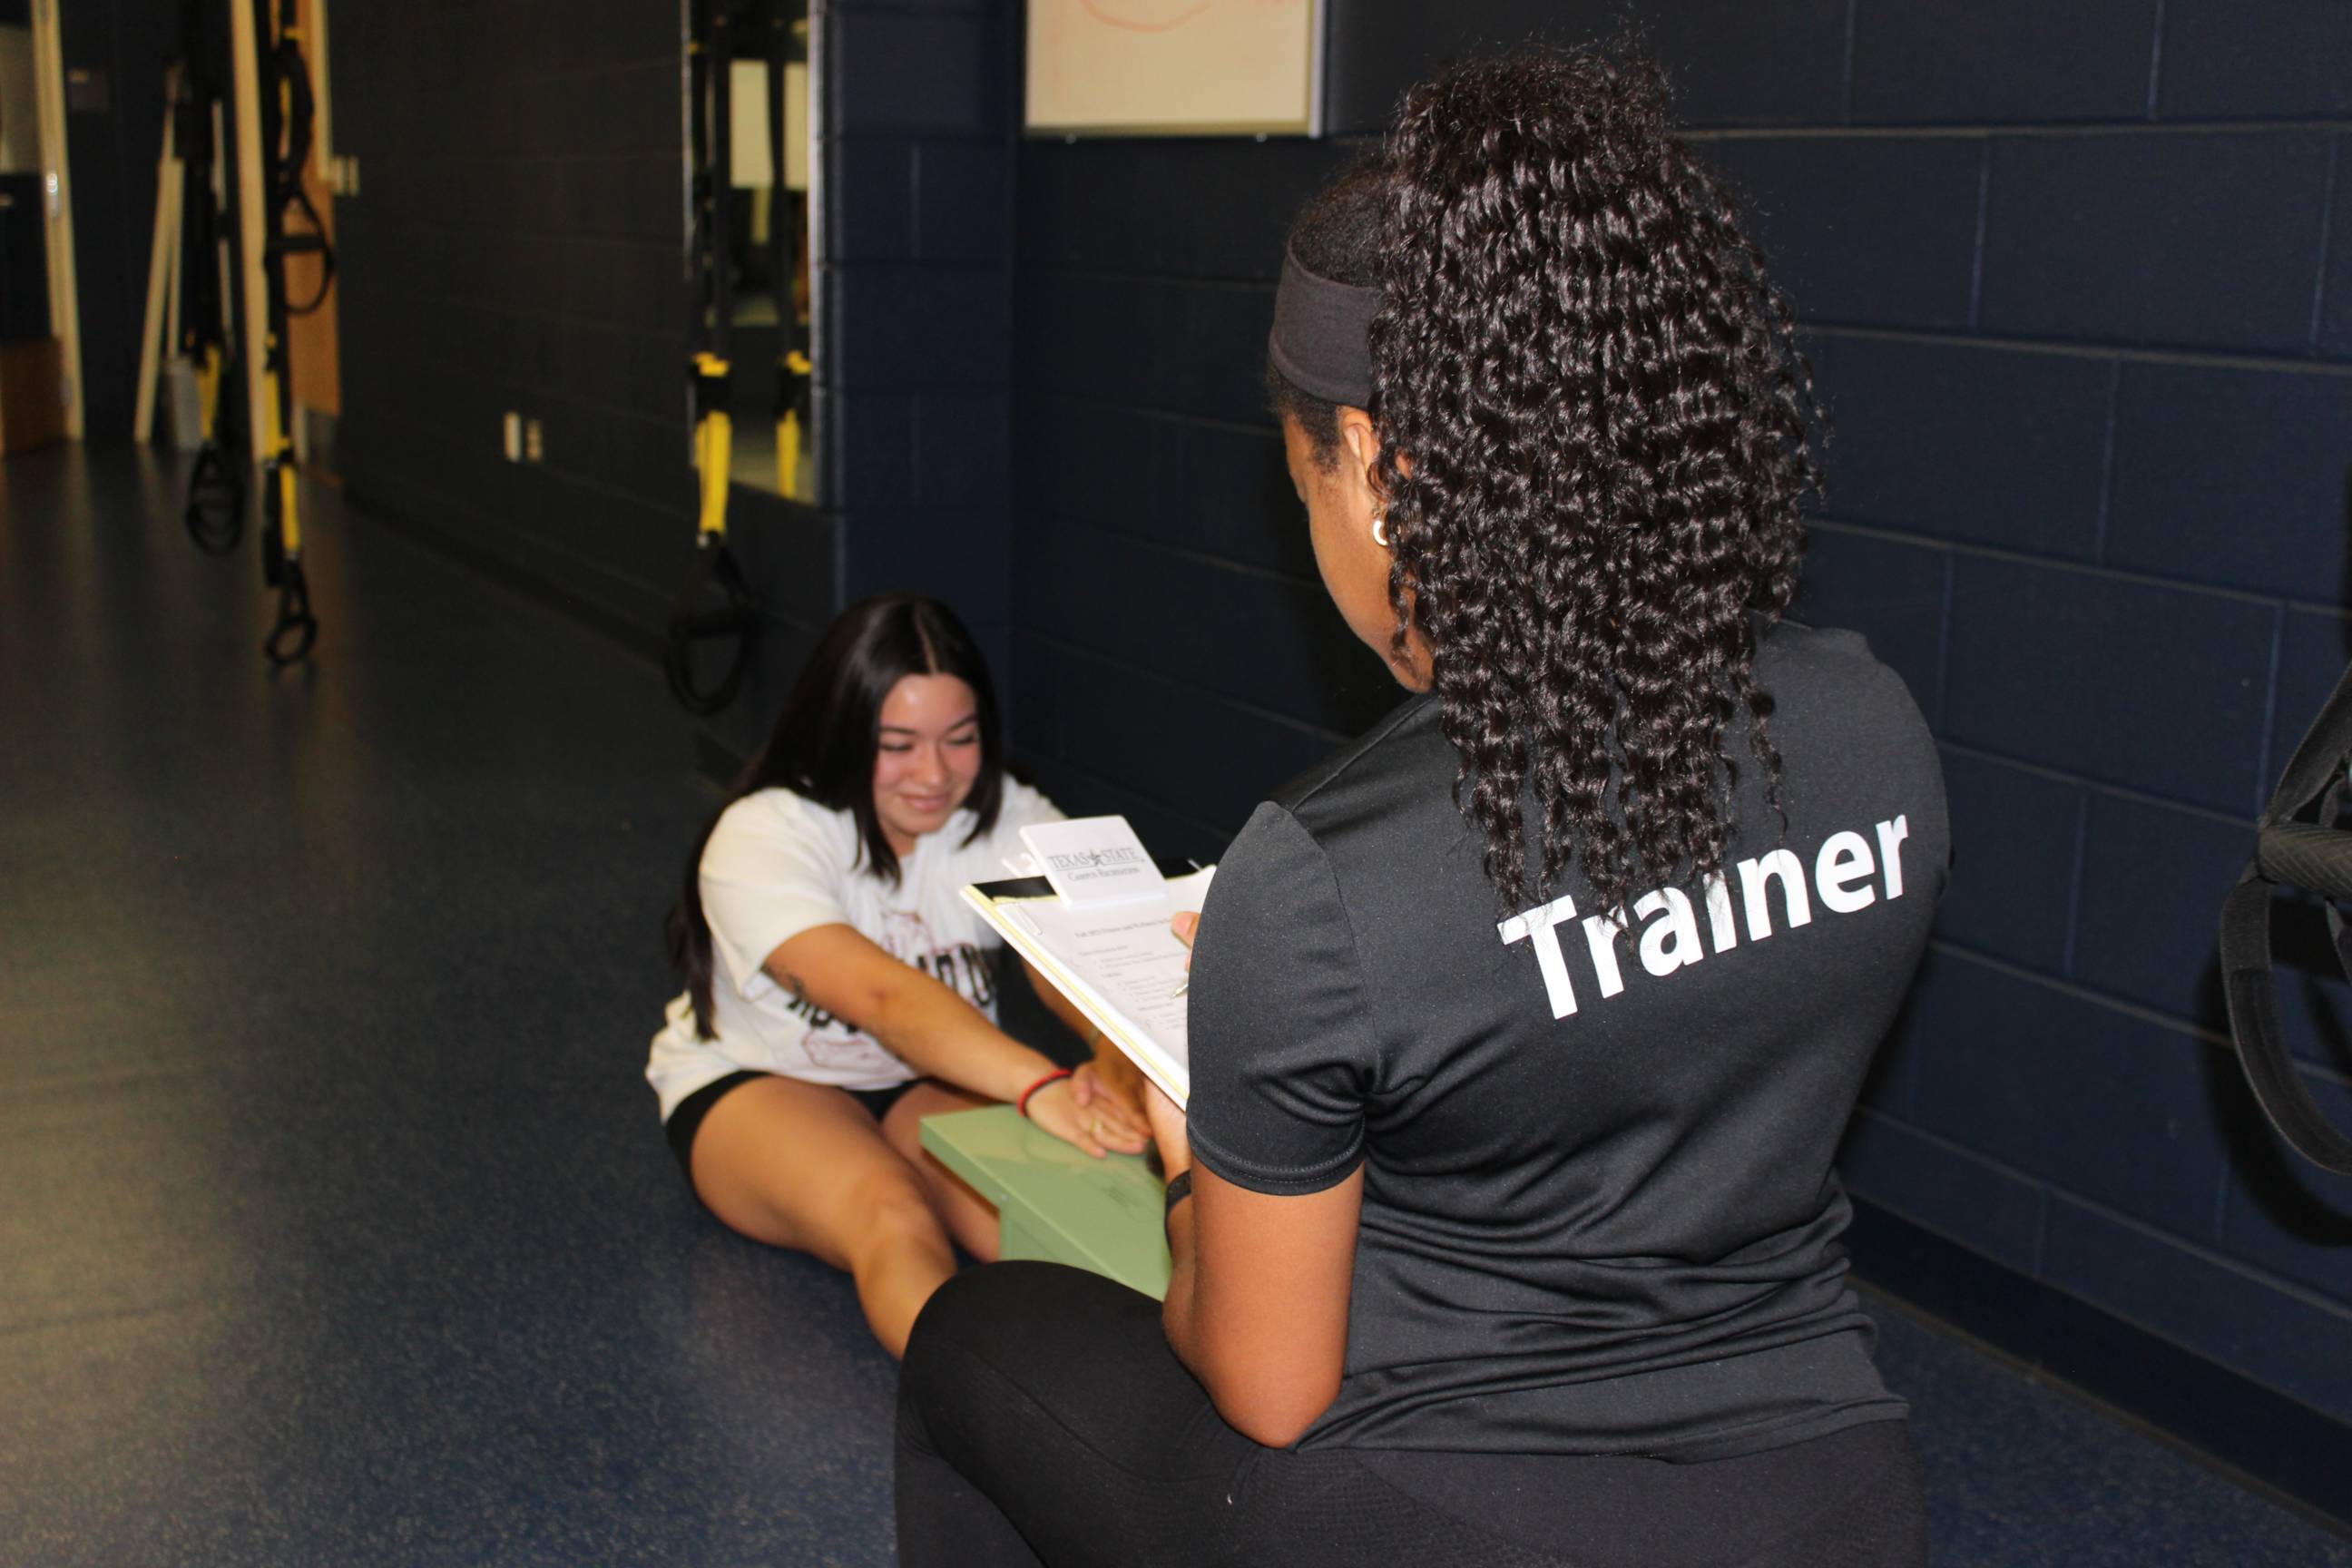 A trainer assessing a studnet